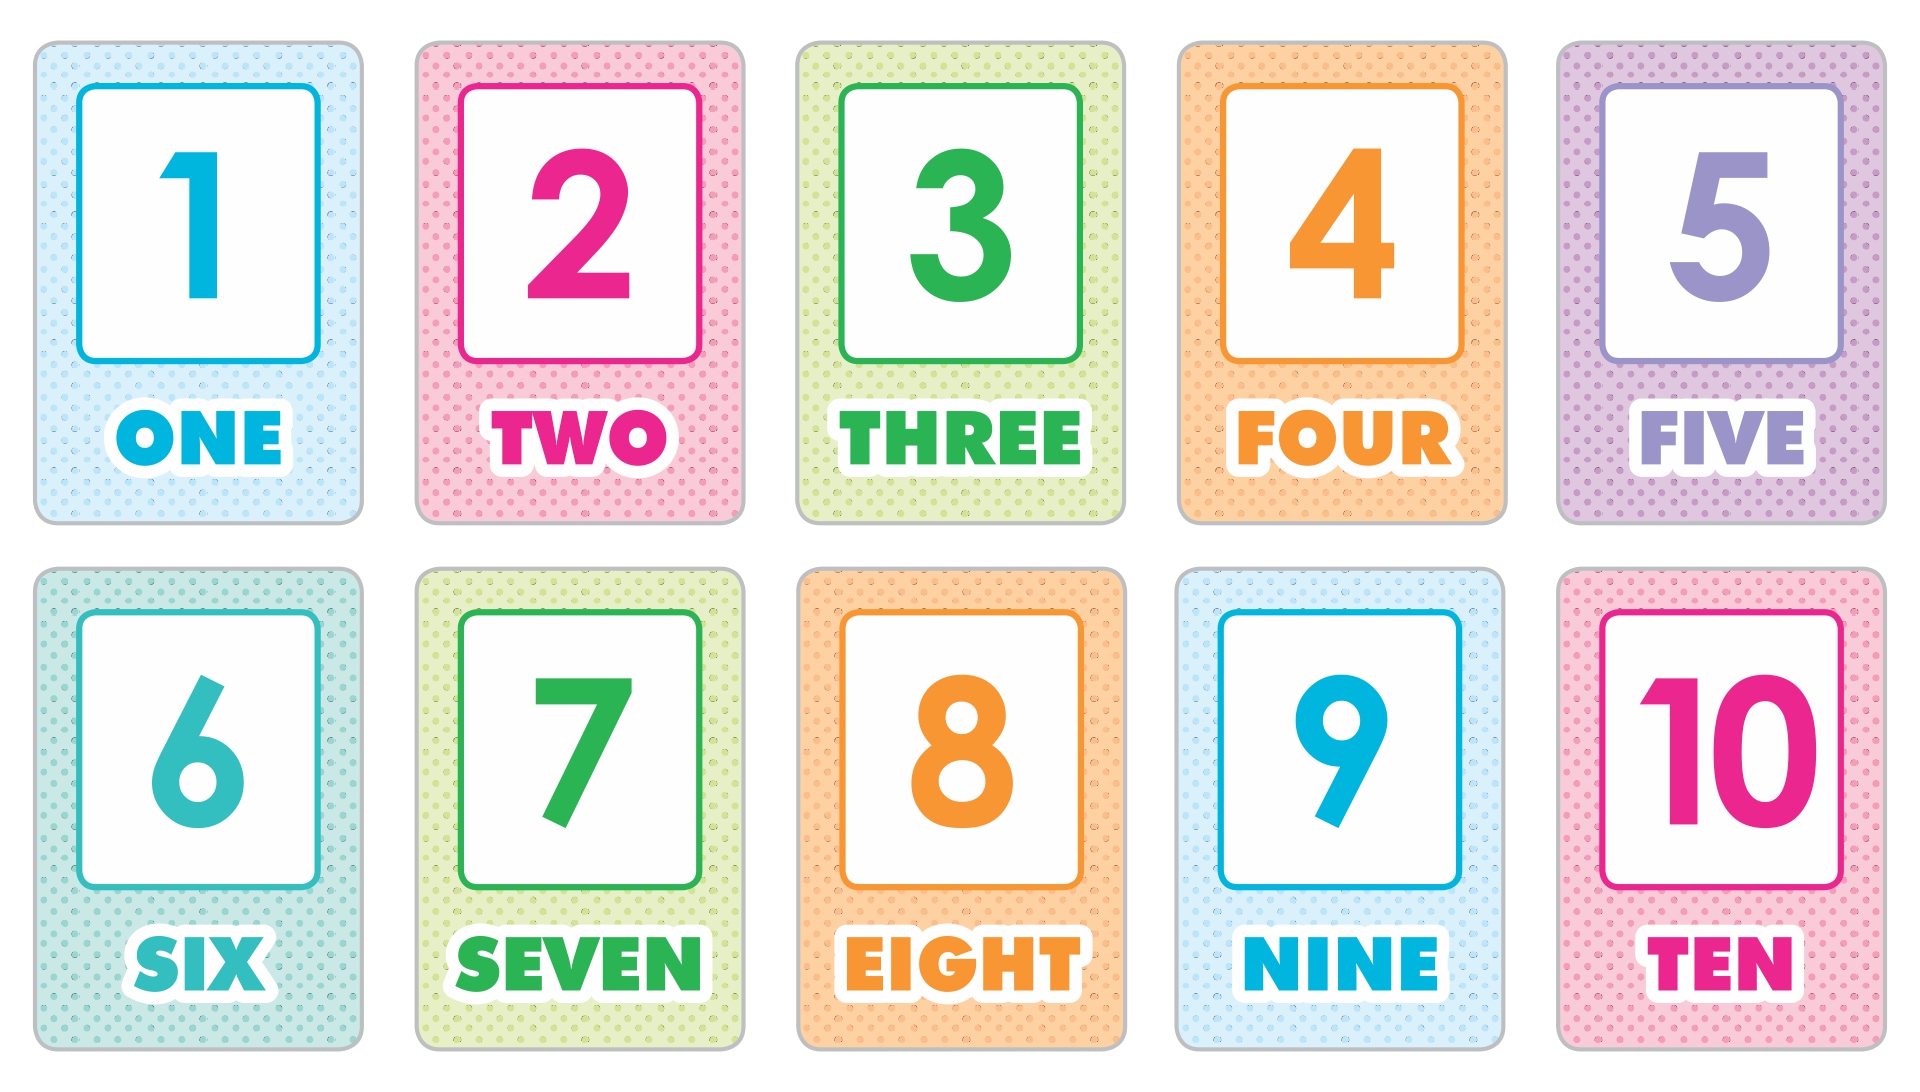 4 Best Images Of Large Printable Number Cards 1 20 6 Best Images Of 